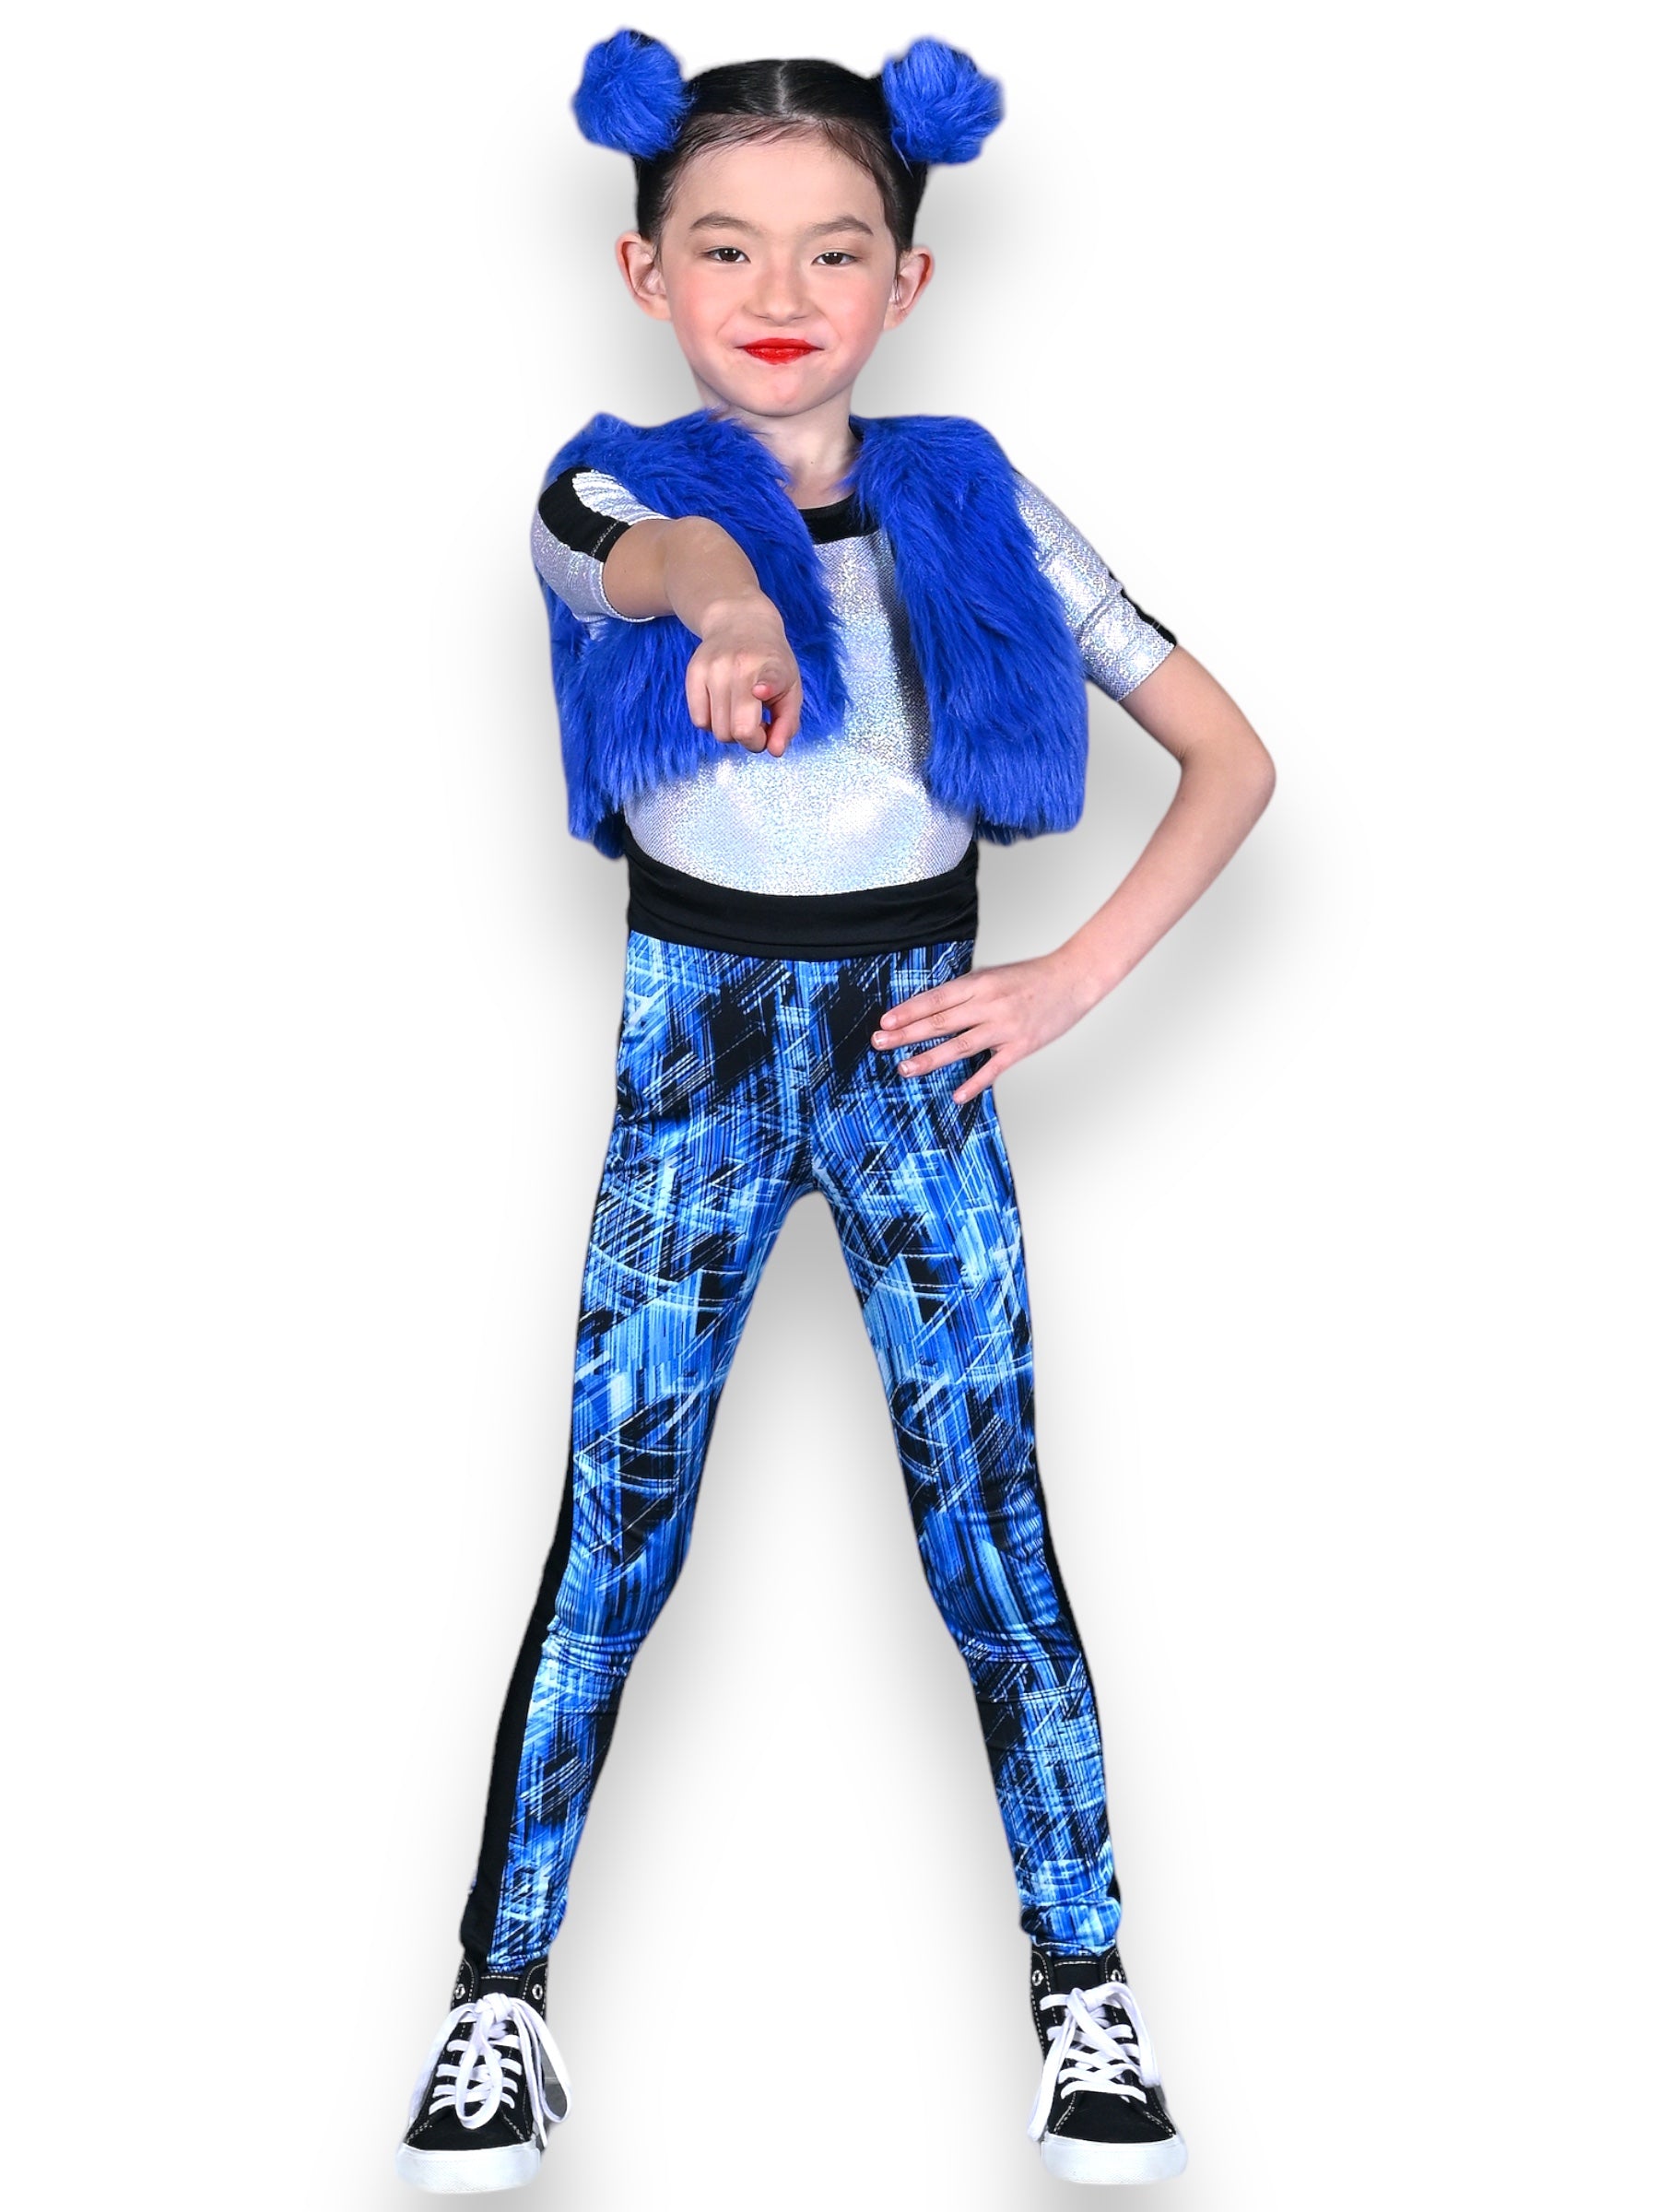 Dive into 'Break The Ice' with our small child size dance costume in shimmering blue-silver. Brand new, never worn. Foil dot spandex meets faux fur vest elegance. Exclusive at The Dance Rack - where you always sparkle for less. Limited availability!